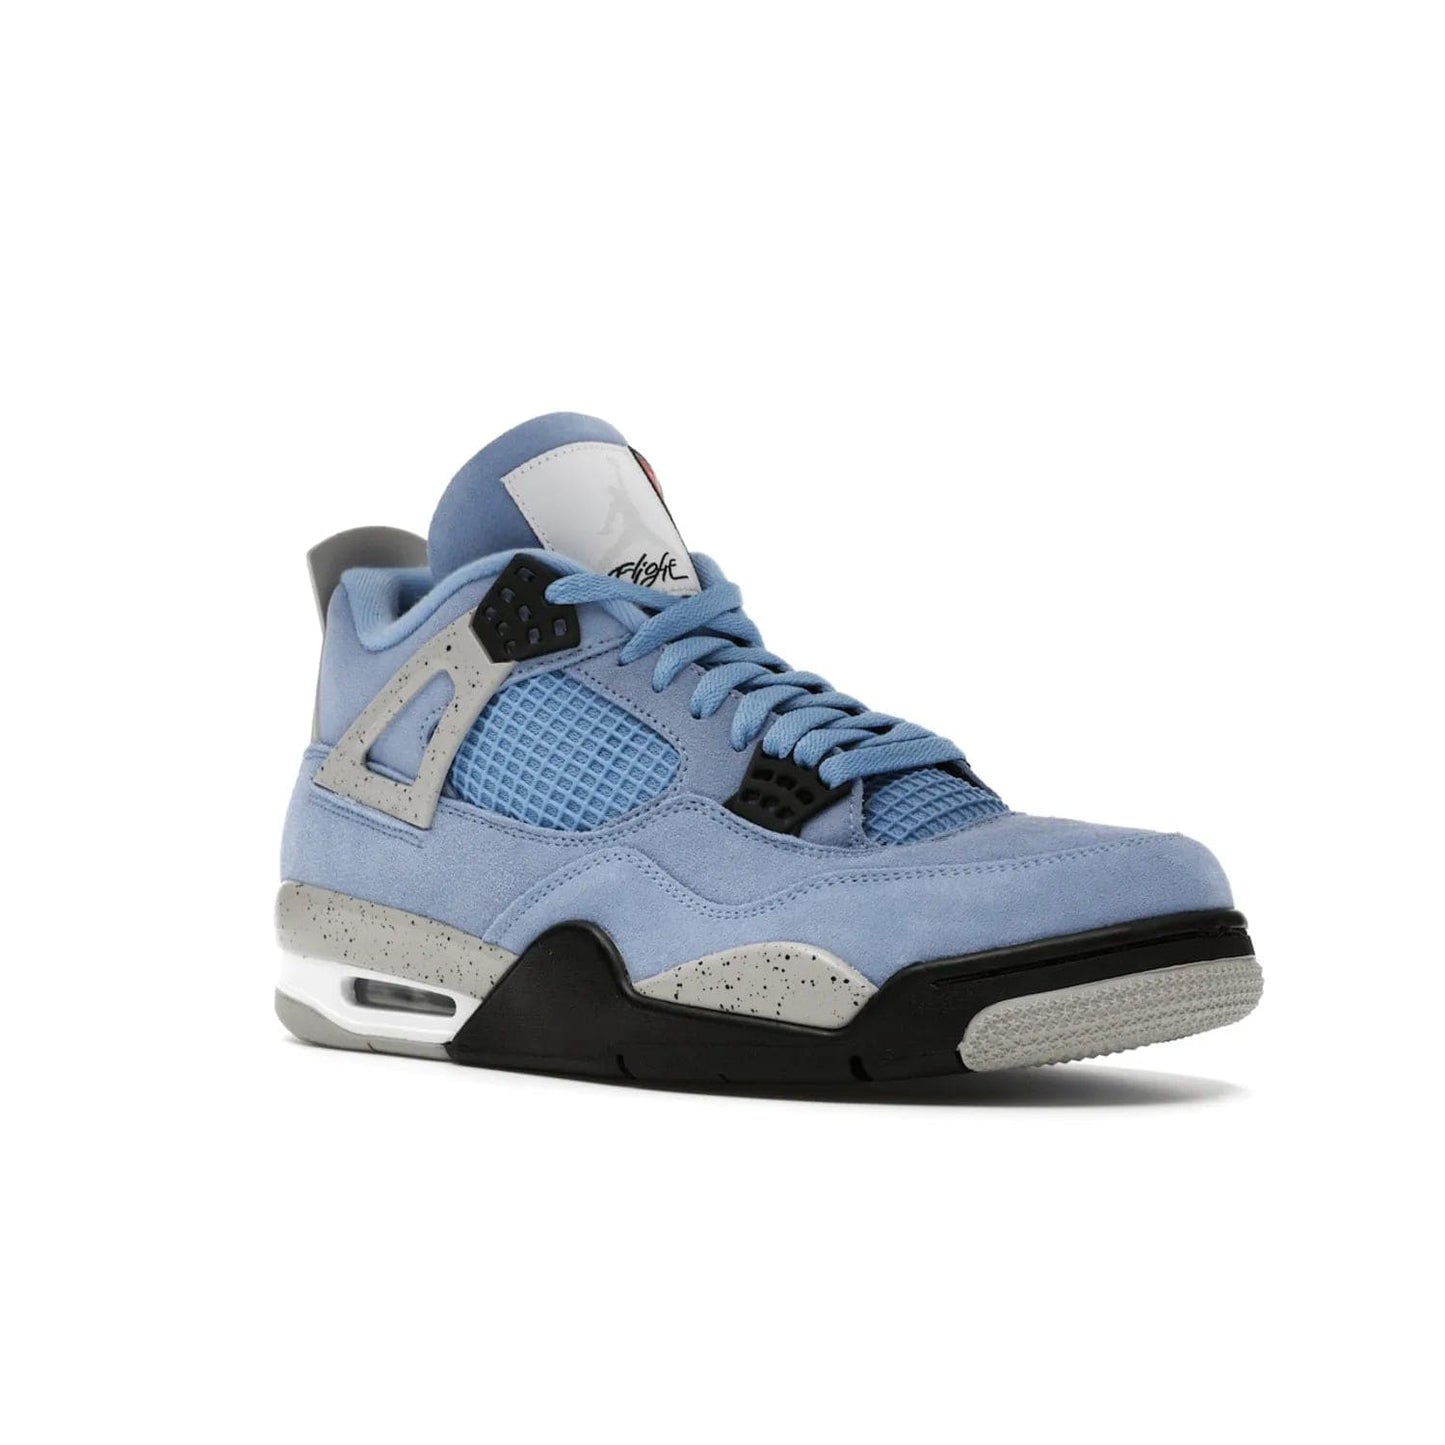 Jordan 4 Retro University Blue - Image 5 - Only at www.BallersClubKickz.com - The Air Jordan 4 University Blue honors MJ's alma mater. Rich University Blue suede, panels of netting, and Cement Grey speckled eyelets give this design an edgy look. Features a black, white and Tech Grey sole with a clear Air unit and two woven labels on the tongue. Jumpman logo & Team Jordan jock tag included. Released April 2021.